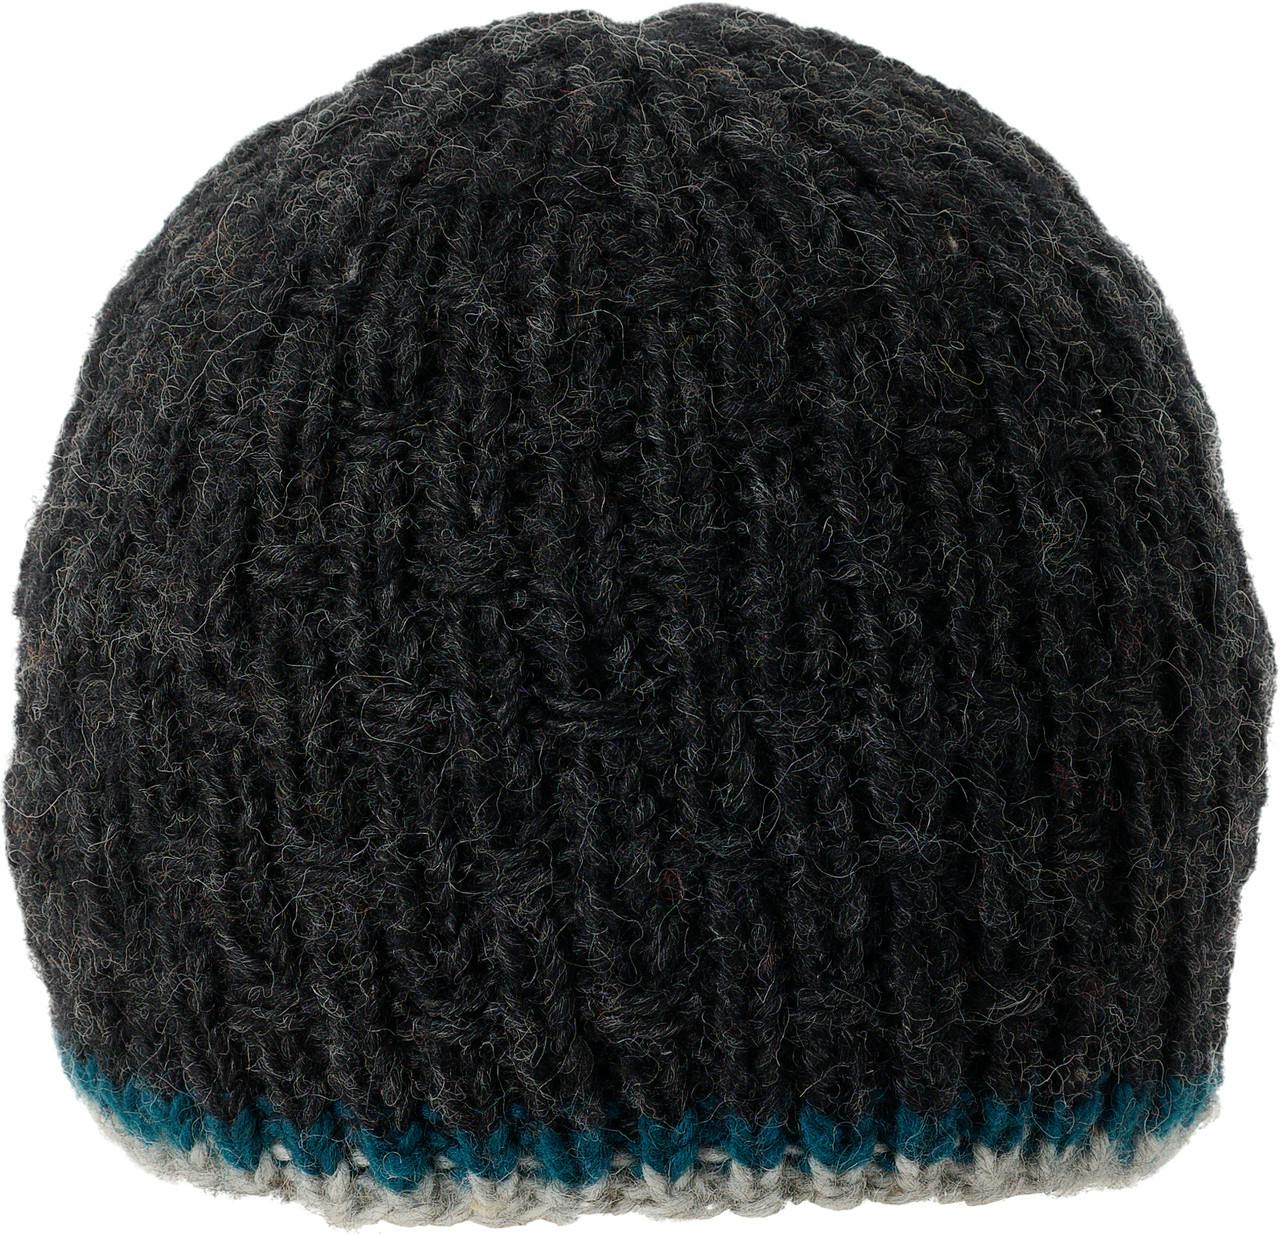 Andrew Toque Heather Charcoal/Blue